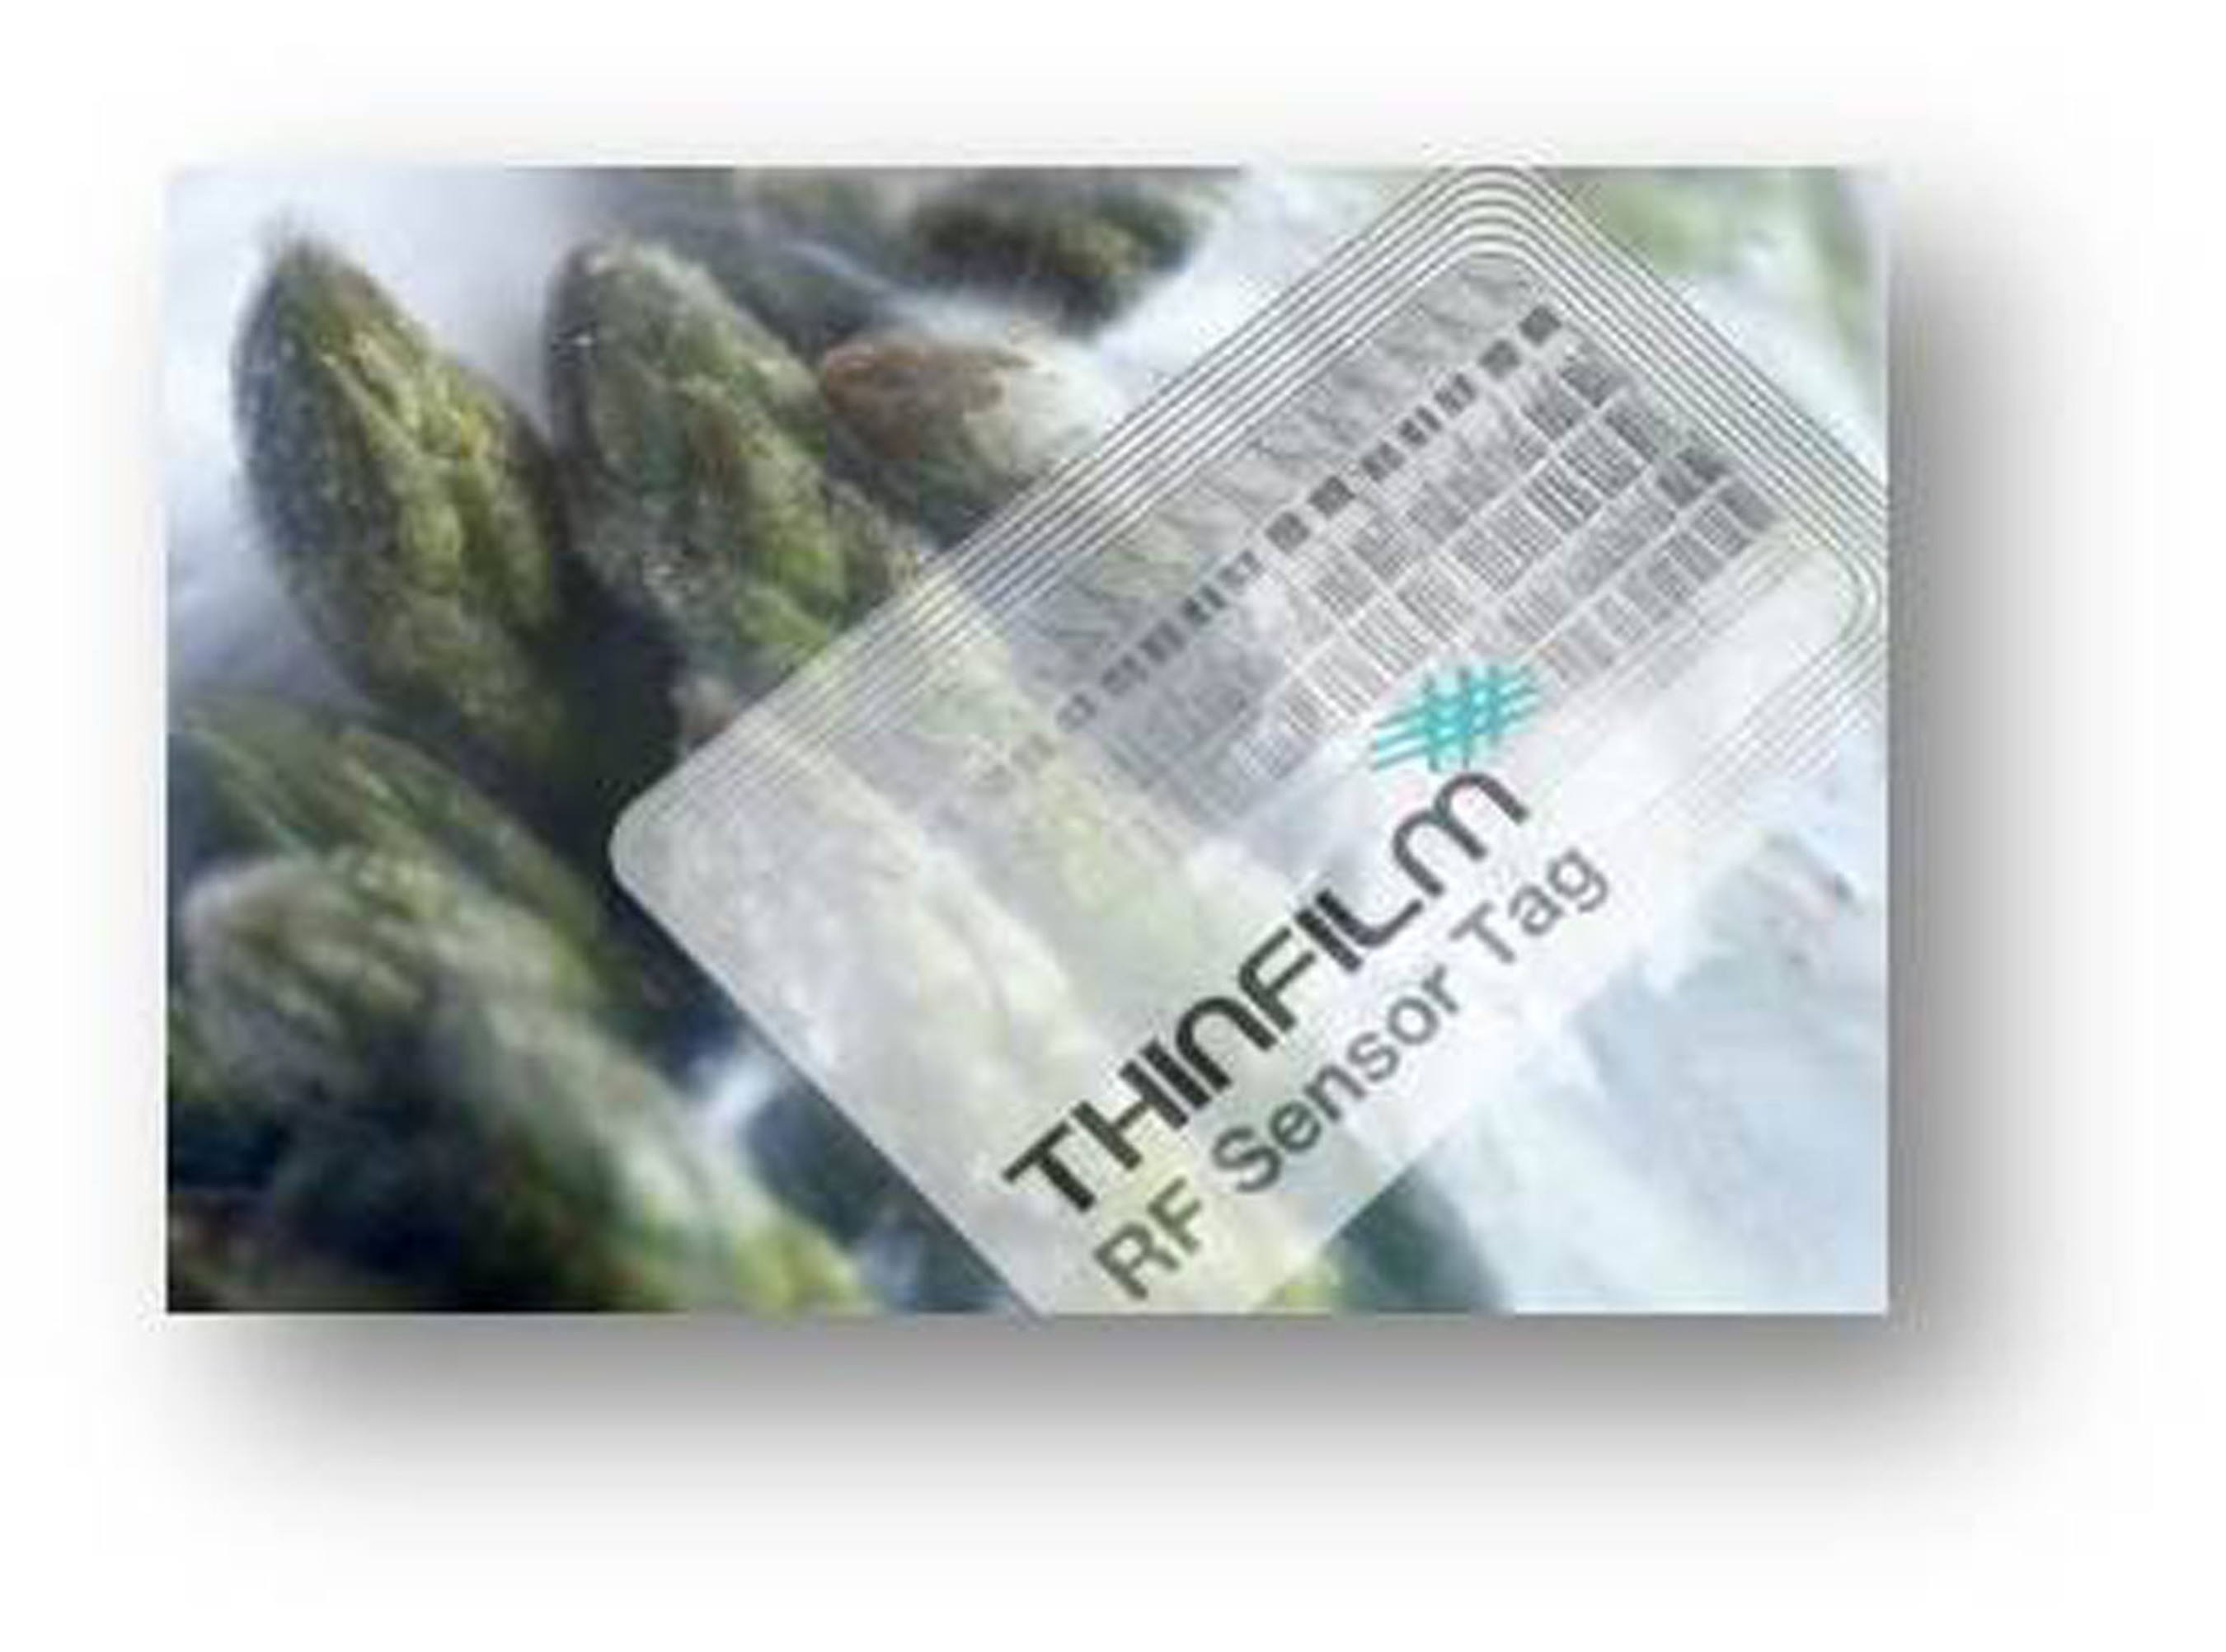 RFID & Asparagus: A Printed Tag includes a Sensor, Memory and Display Capabilities. Courtesy, ThinFilm Corp. Corp. (PRNewsFoto/FlexTech Alliance) (PRNewsFoto/FLEXTECH ALLIANCE)